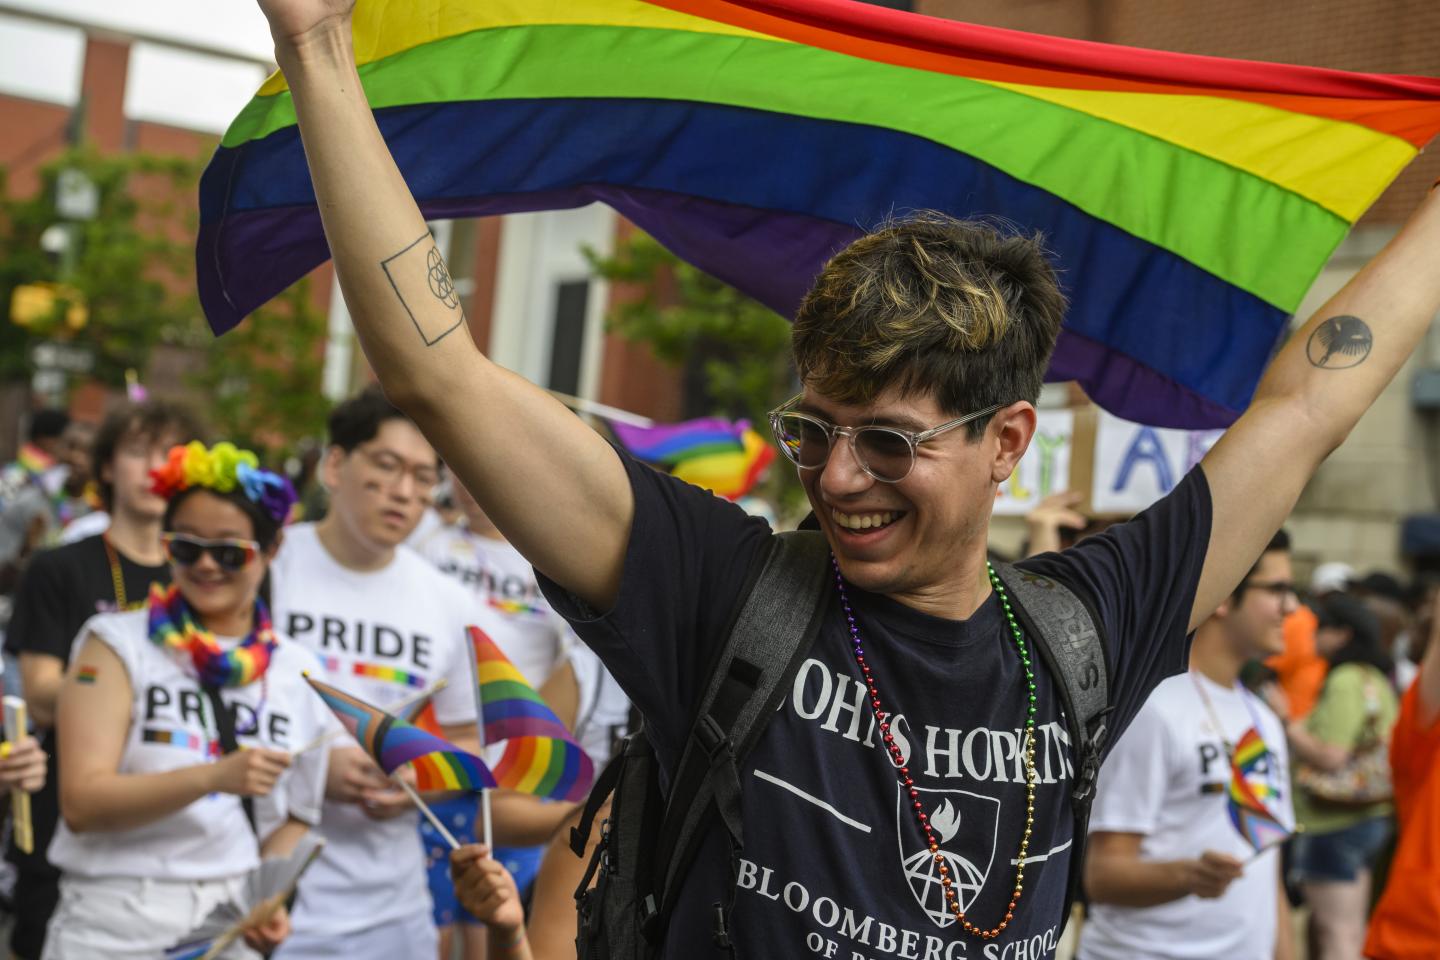 An adult holding a rainbow flag walks in a pride parade.